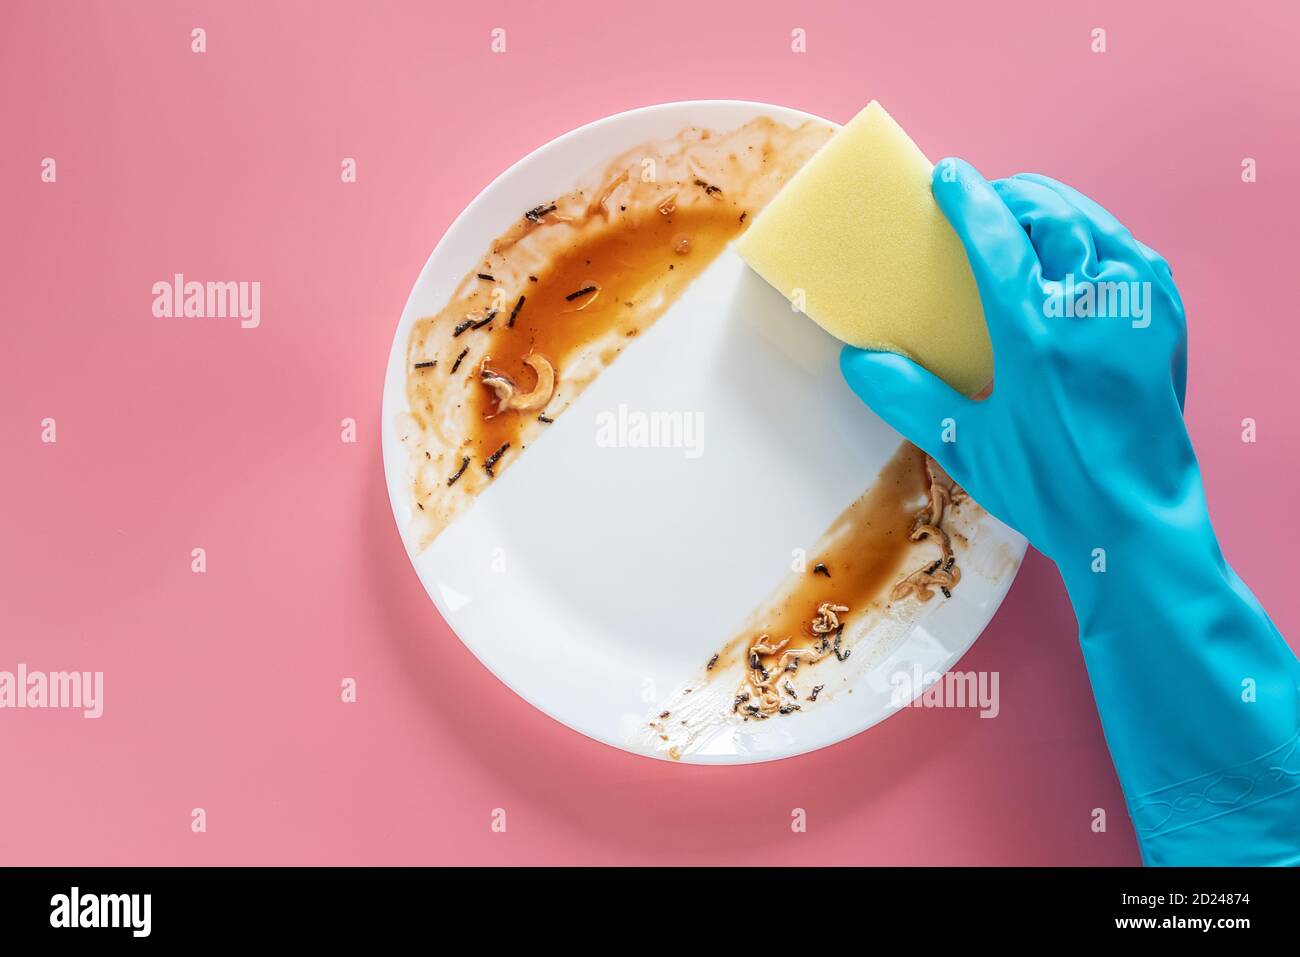 hand in blue rubber glove hold yellow cleaning sponge to clean up and washing food stains and dirt on white dish after eating meal isolated on pink Stock Photo